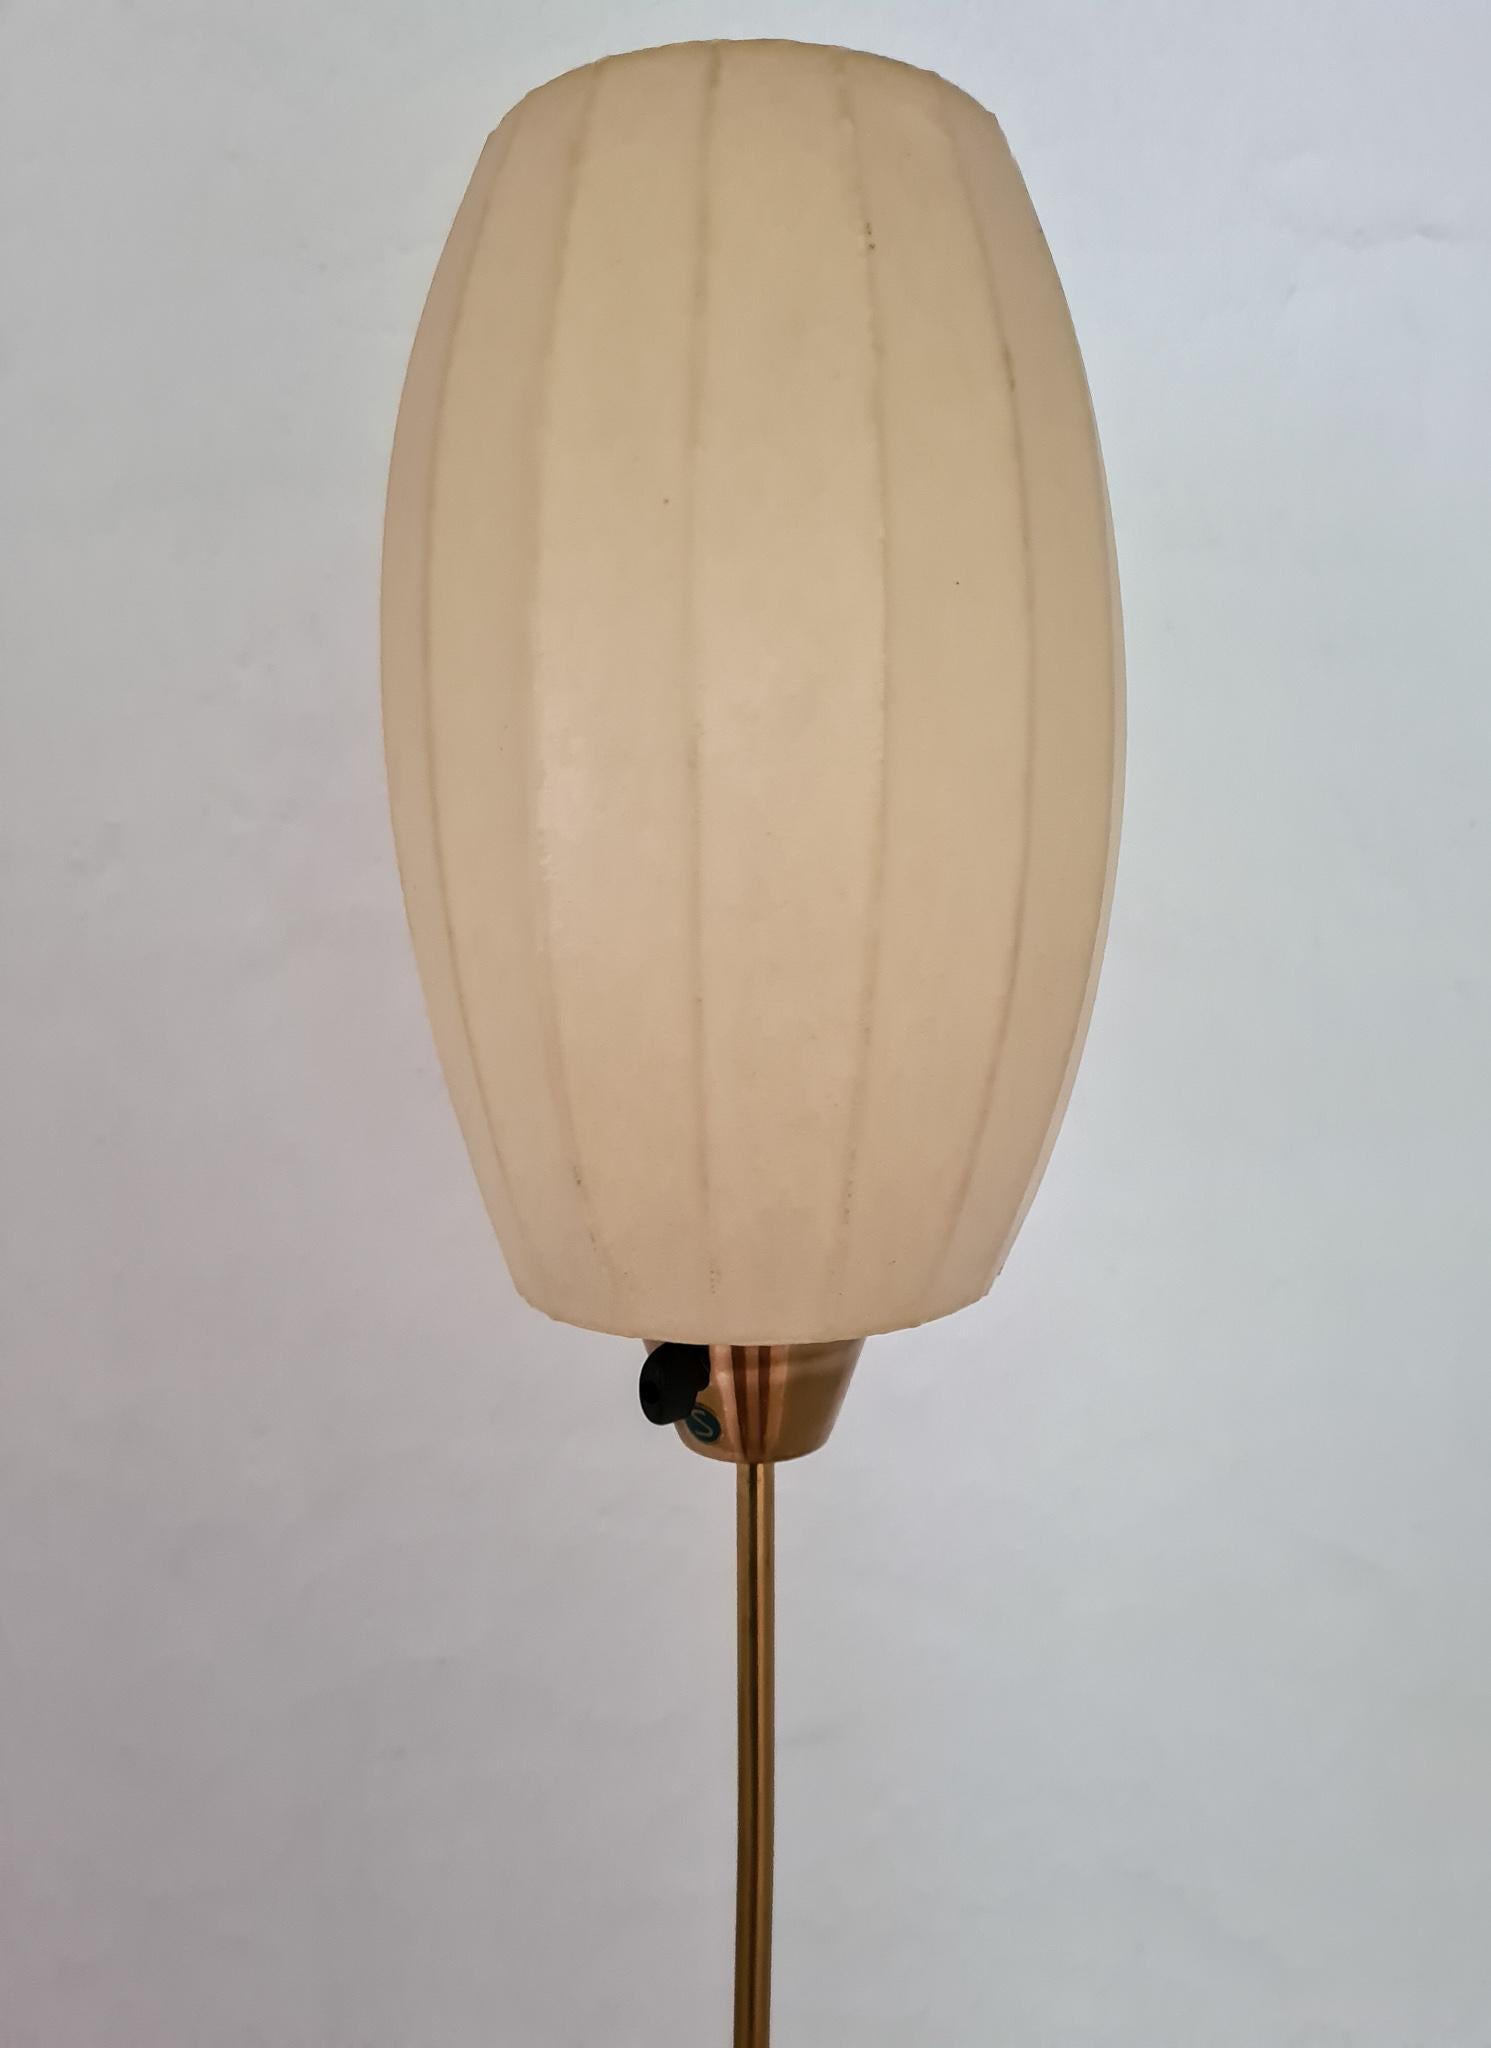 Midcentury Floor Lamp Attributed to Hans Bergström for Ateljé Lyktan For Sale 3